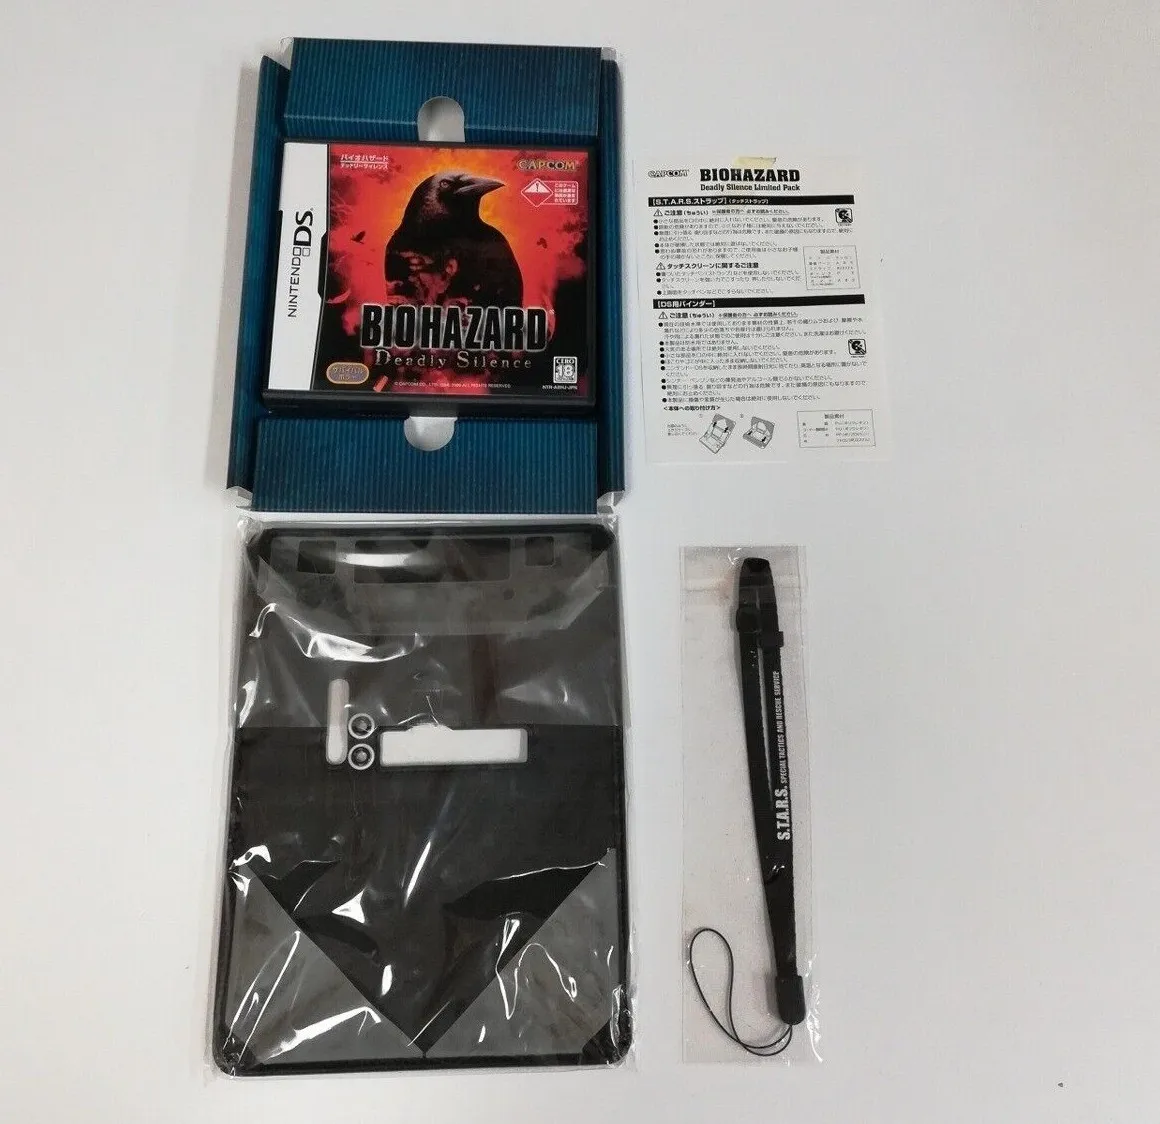 Nintendo DS Capcom BIOHAZARD Deadly Silence Limited Pack resident